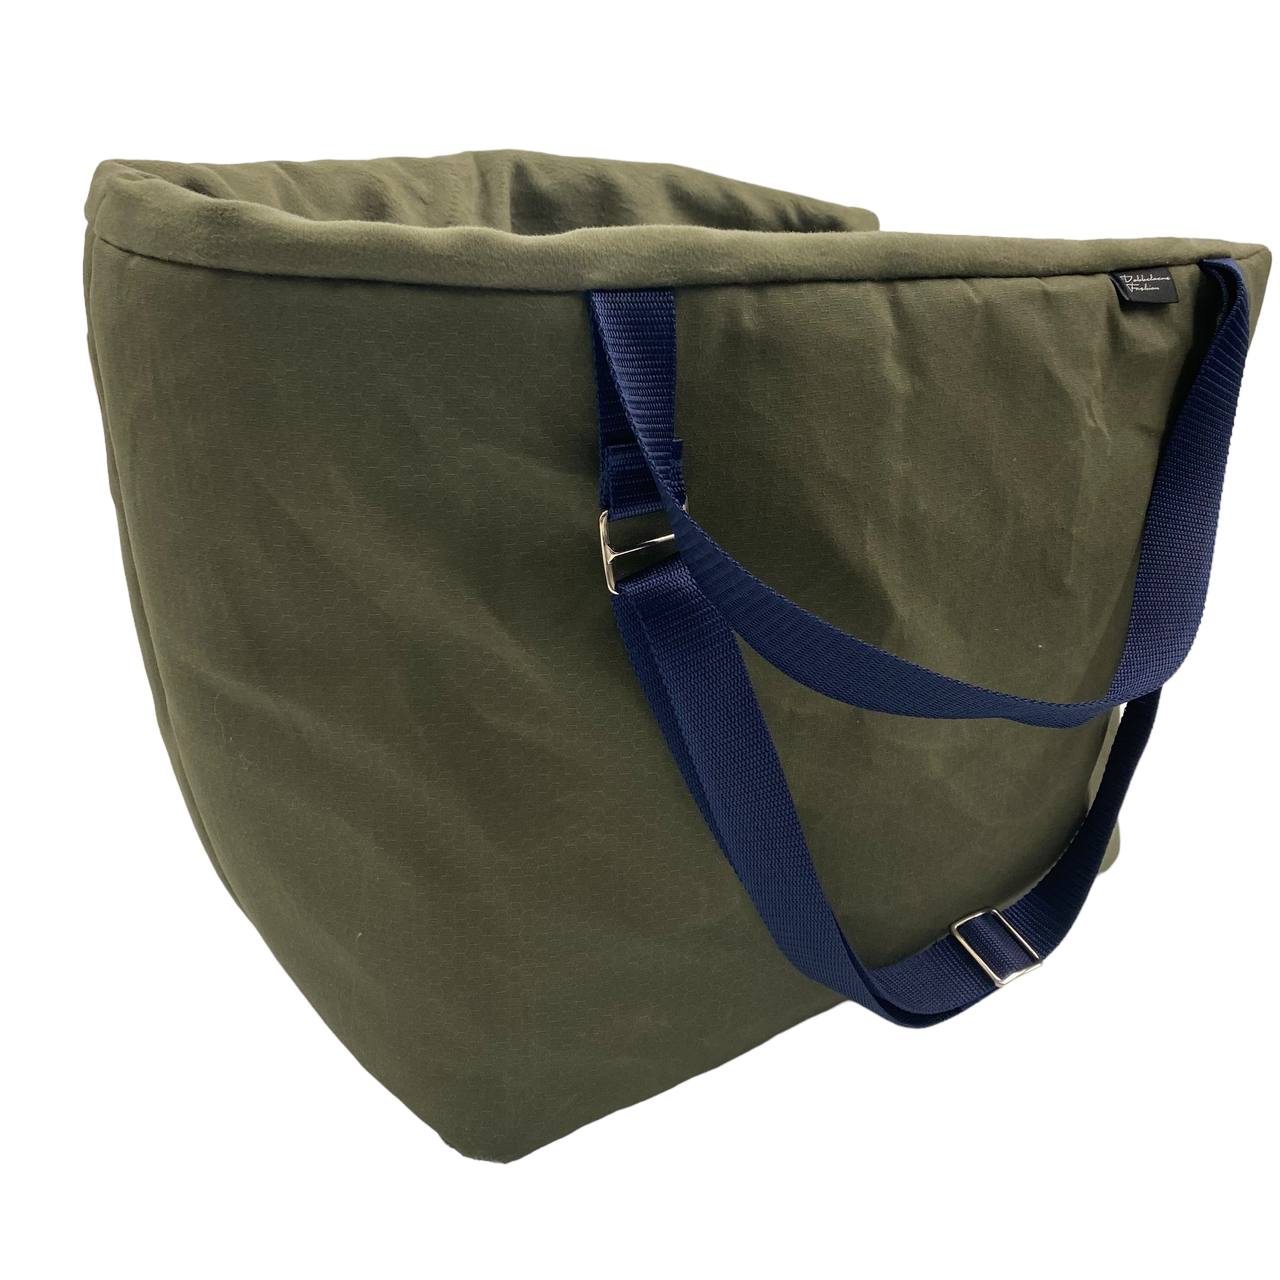 Downton Abbey Water-Repellent Waxed Cotton Dog Carrier